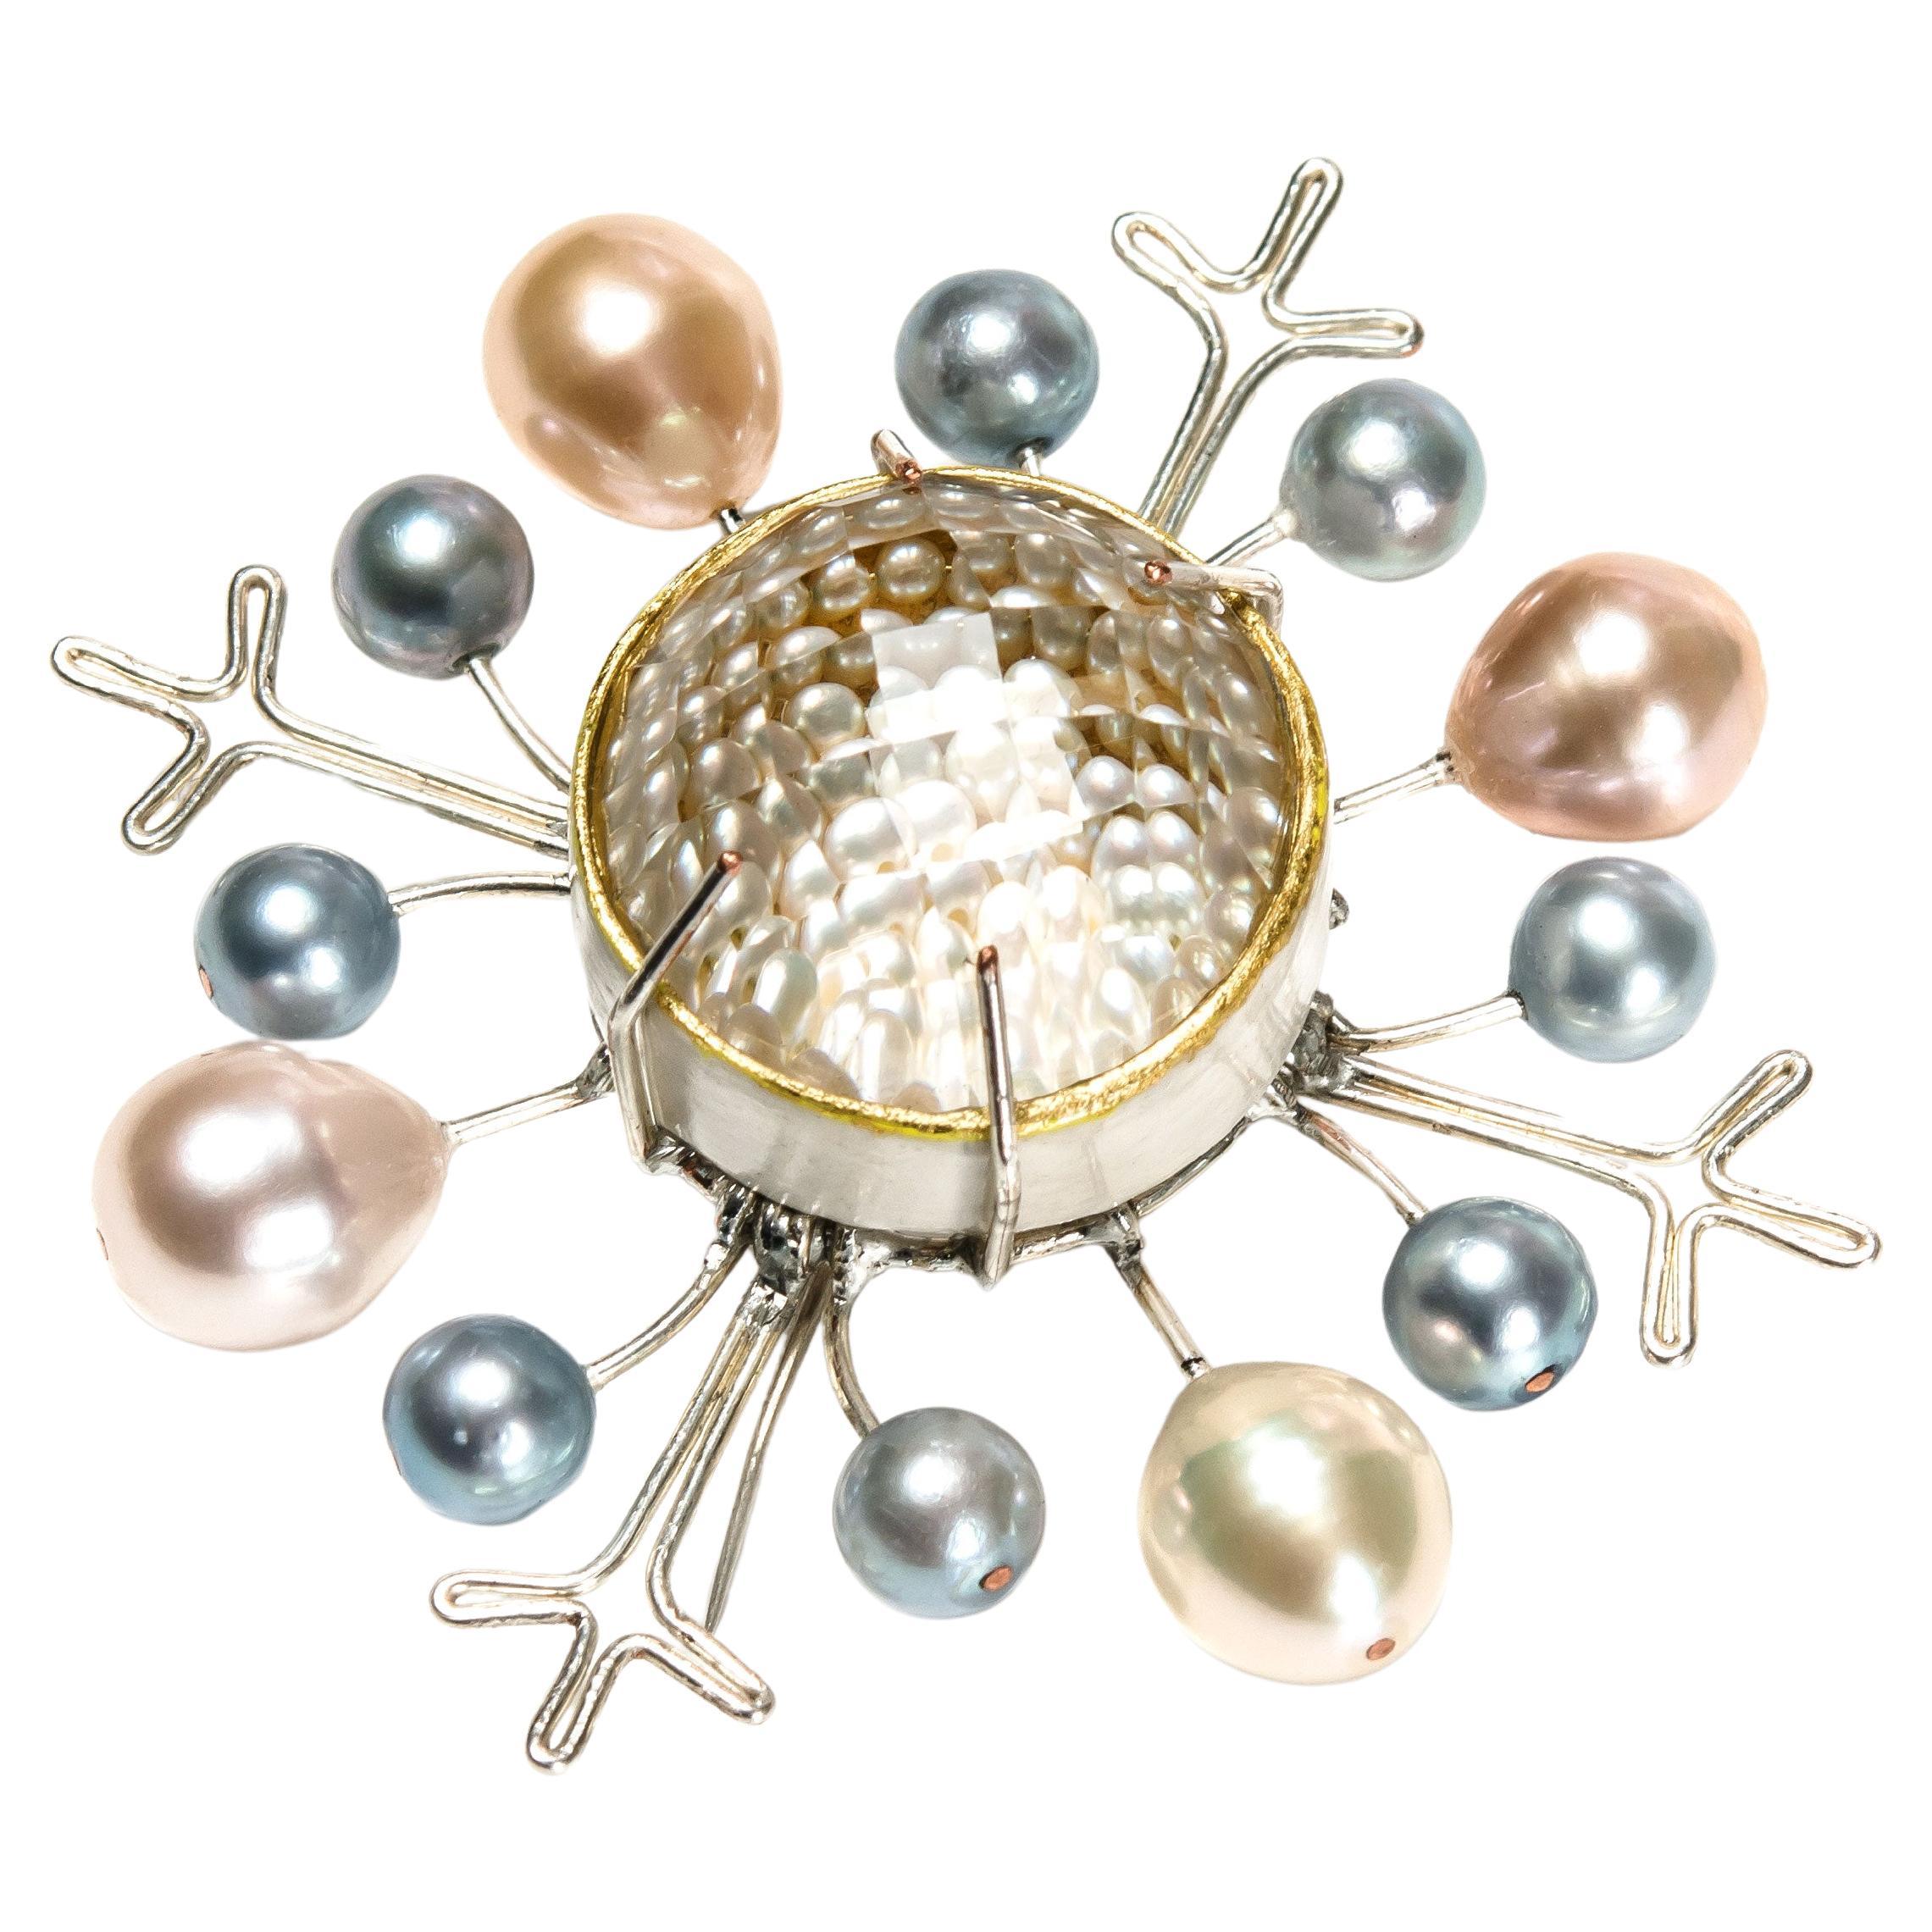 Bodyfurnitures Brooch: Transparency View Rock Crystal with Pearls, Silver For Sale